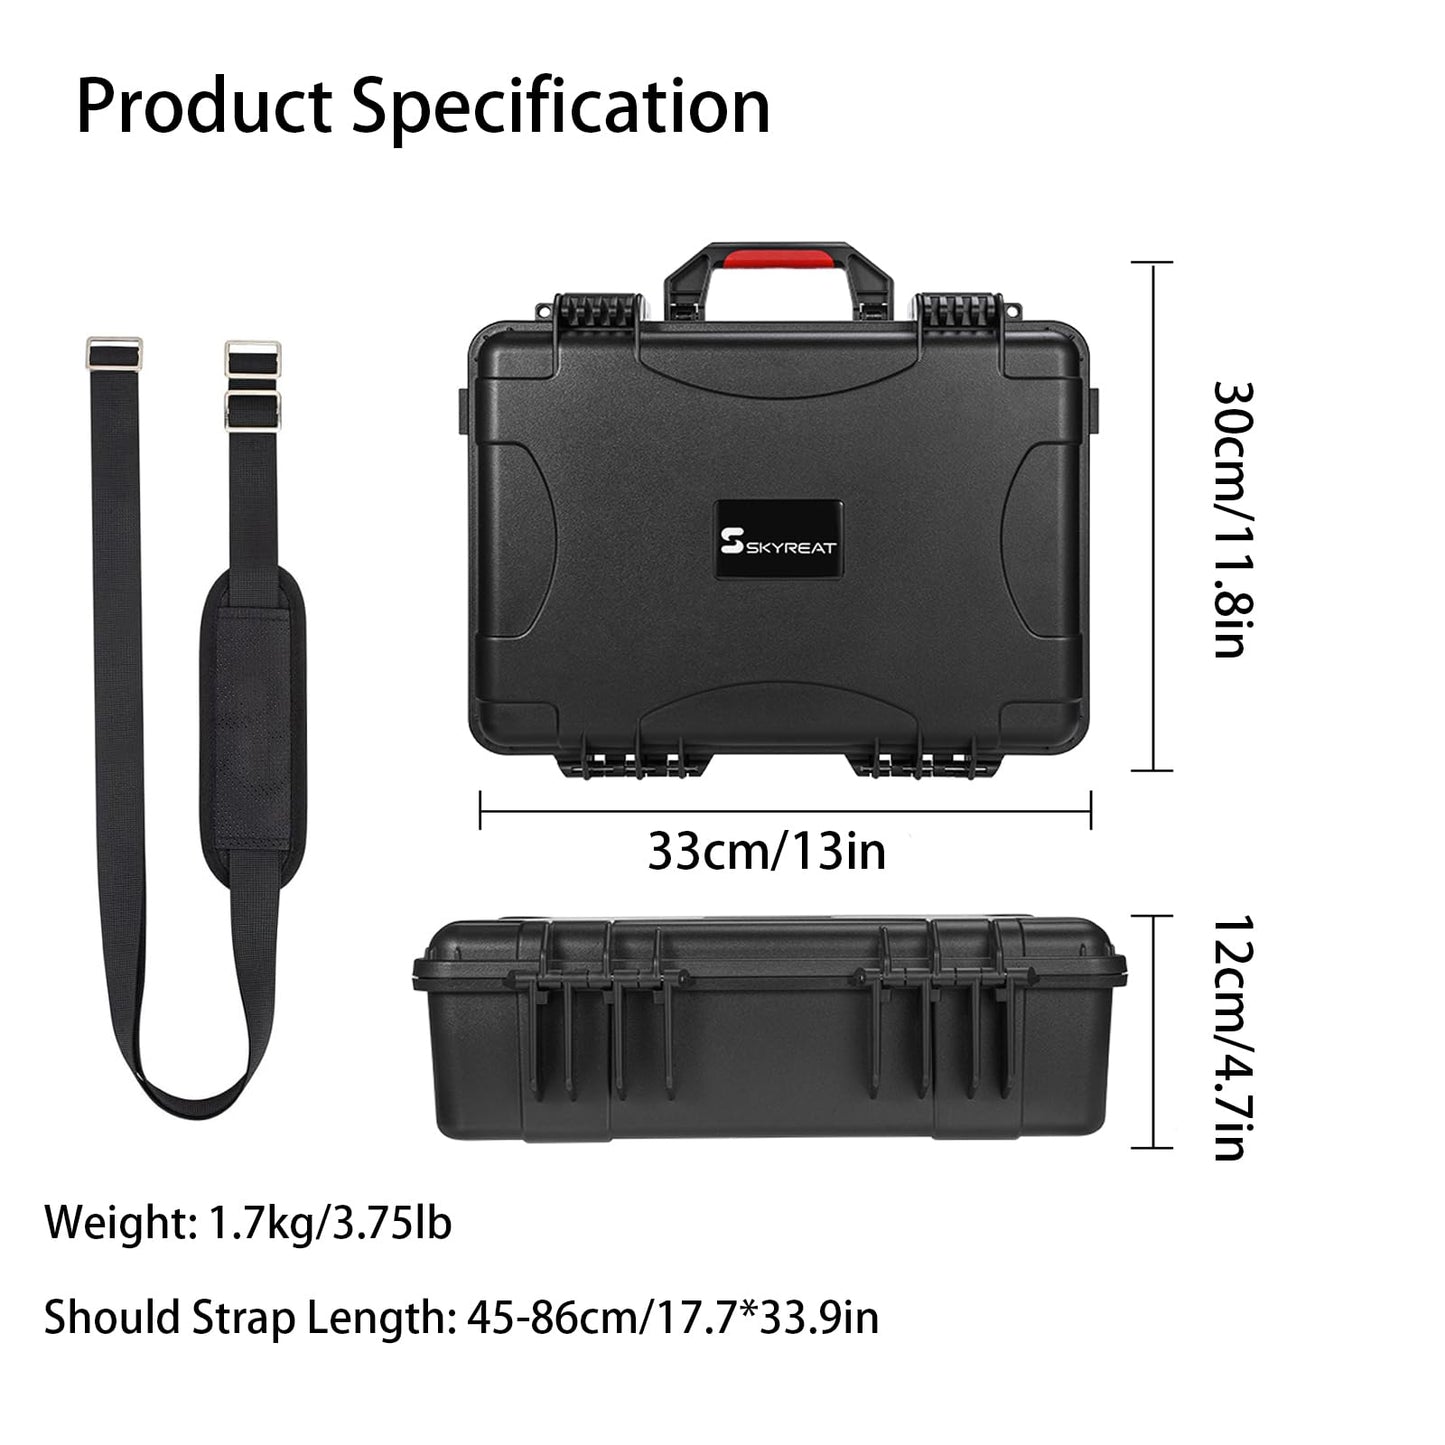 Skyreat Mini 4 Pro Hard Case, Waterproof Hard Shell Storage Bag, Travel Carrying Case for DJI Mini 4 Fly More Combo with DJI RC 2 Controller Drone Accessories